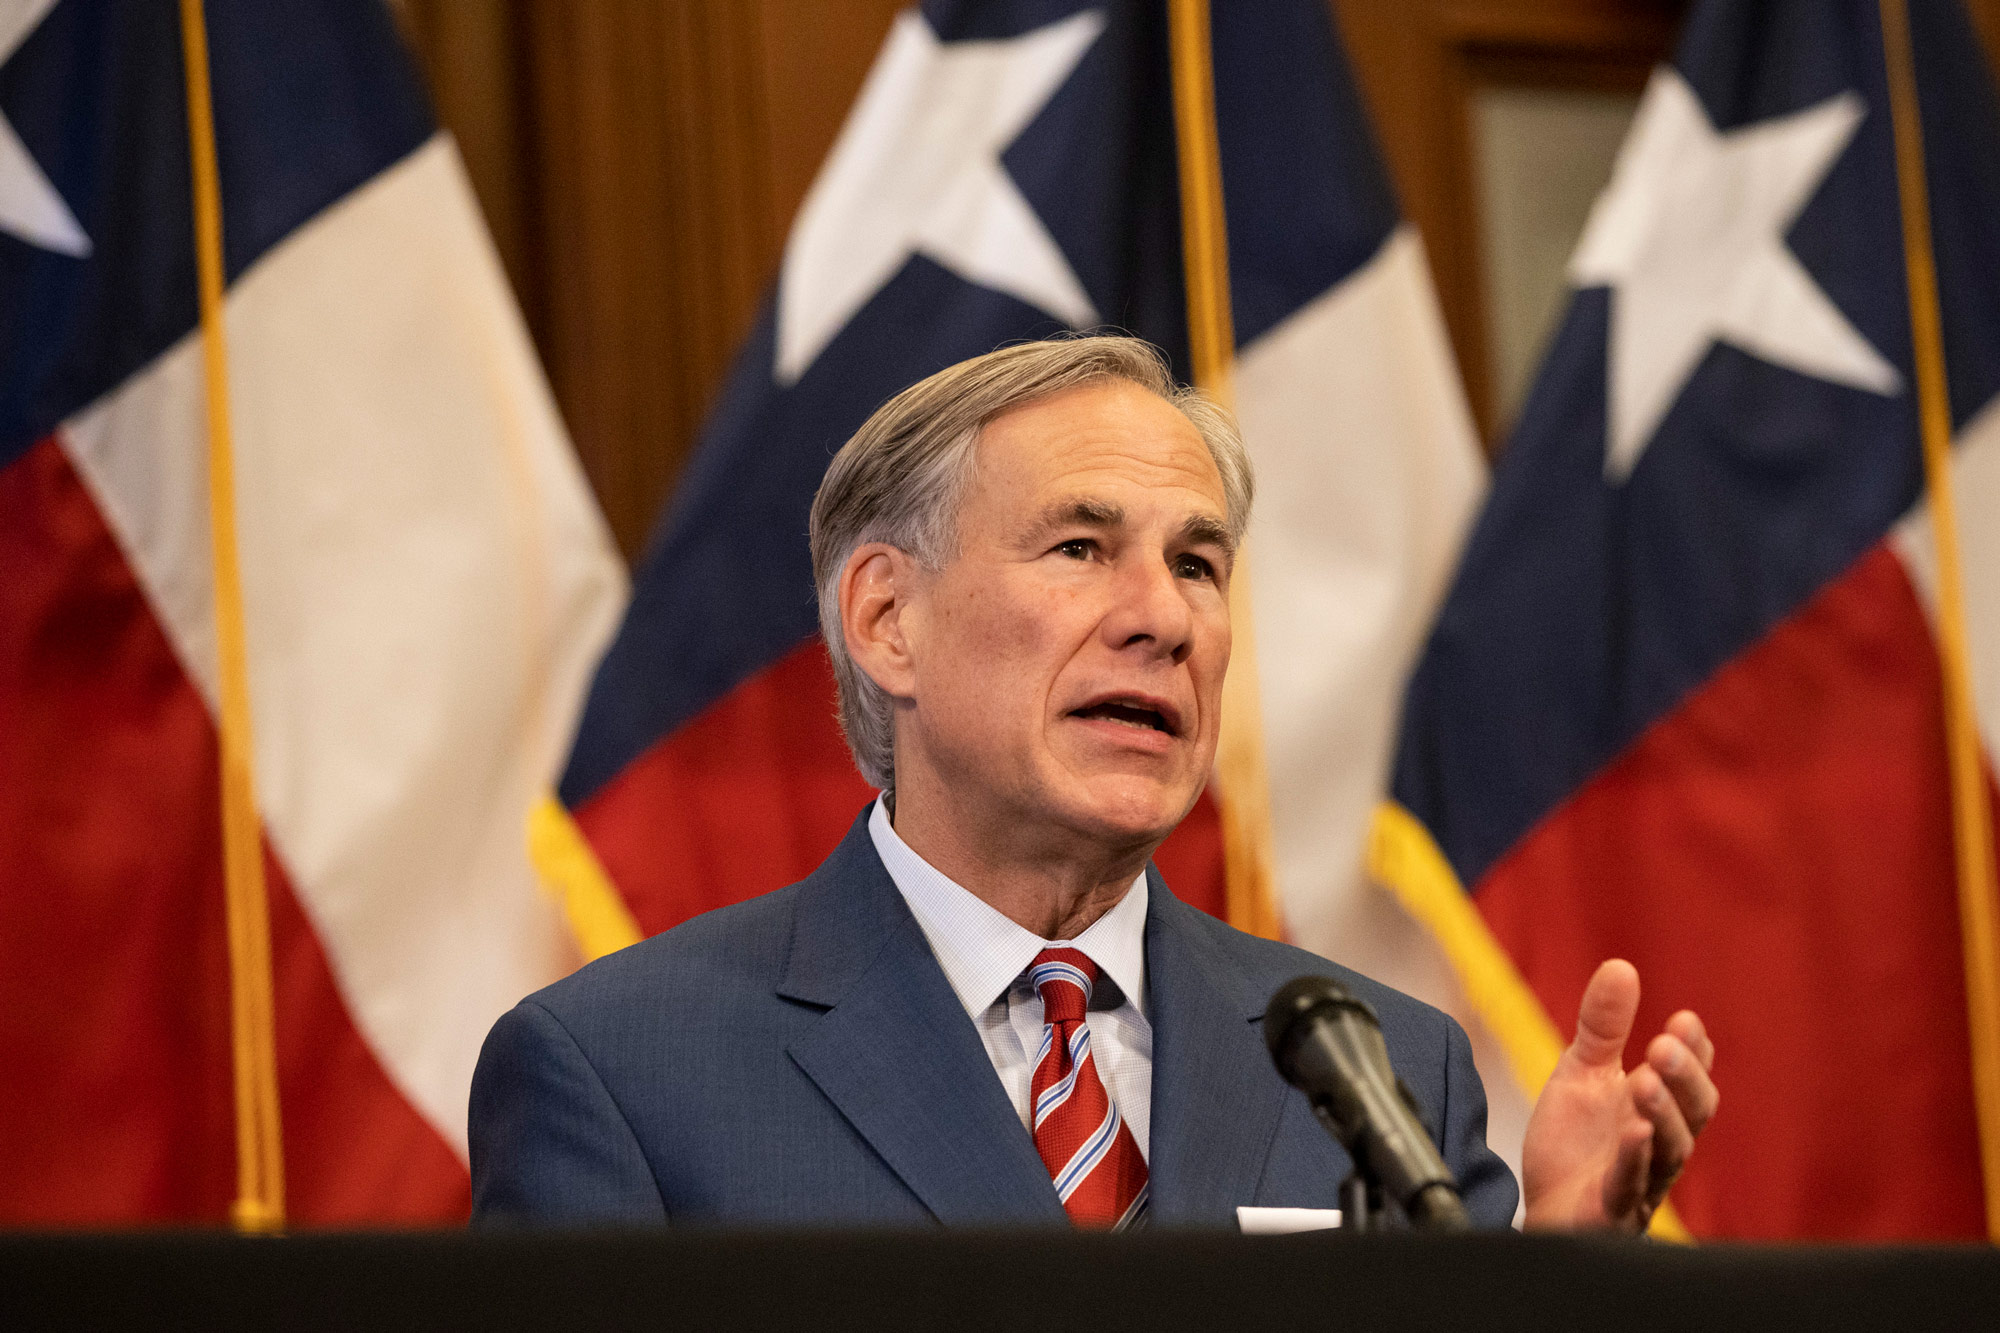 Texas Governor Greg Abbott speaks at a press conference at the Texas State Capitol in Austin on May 18.